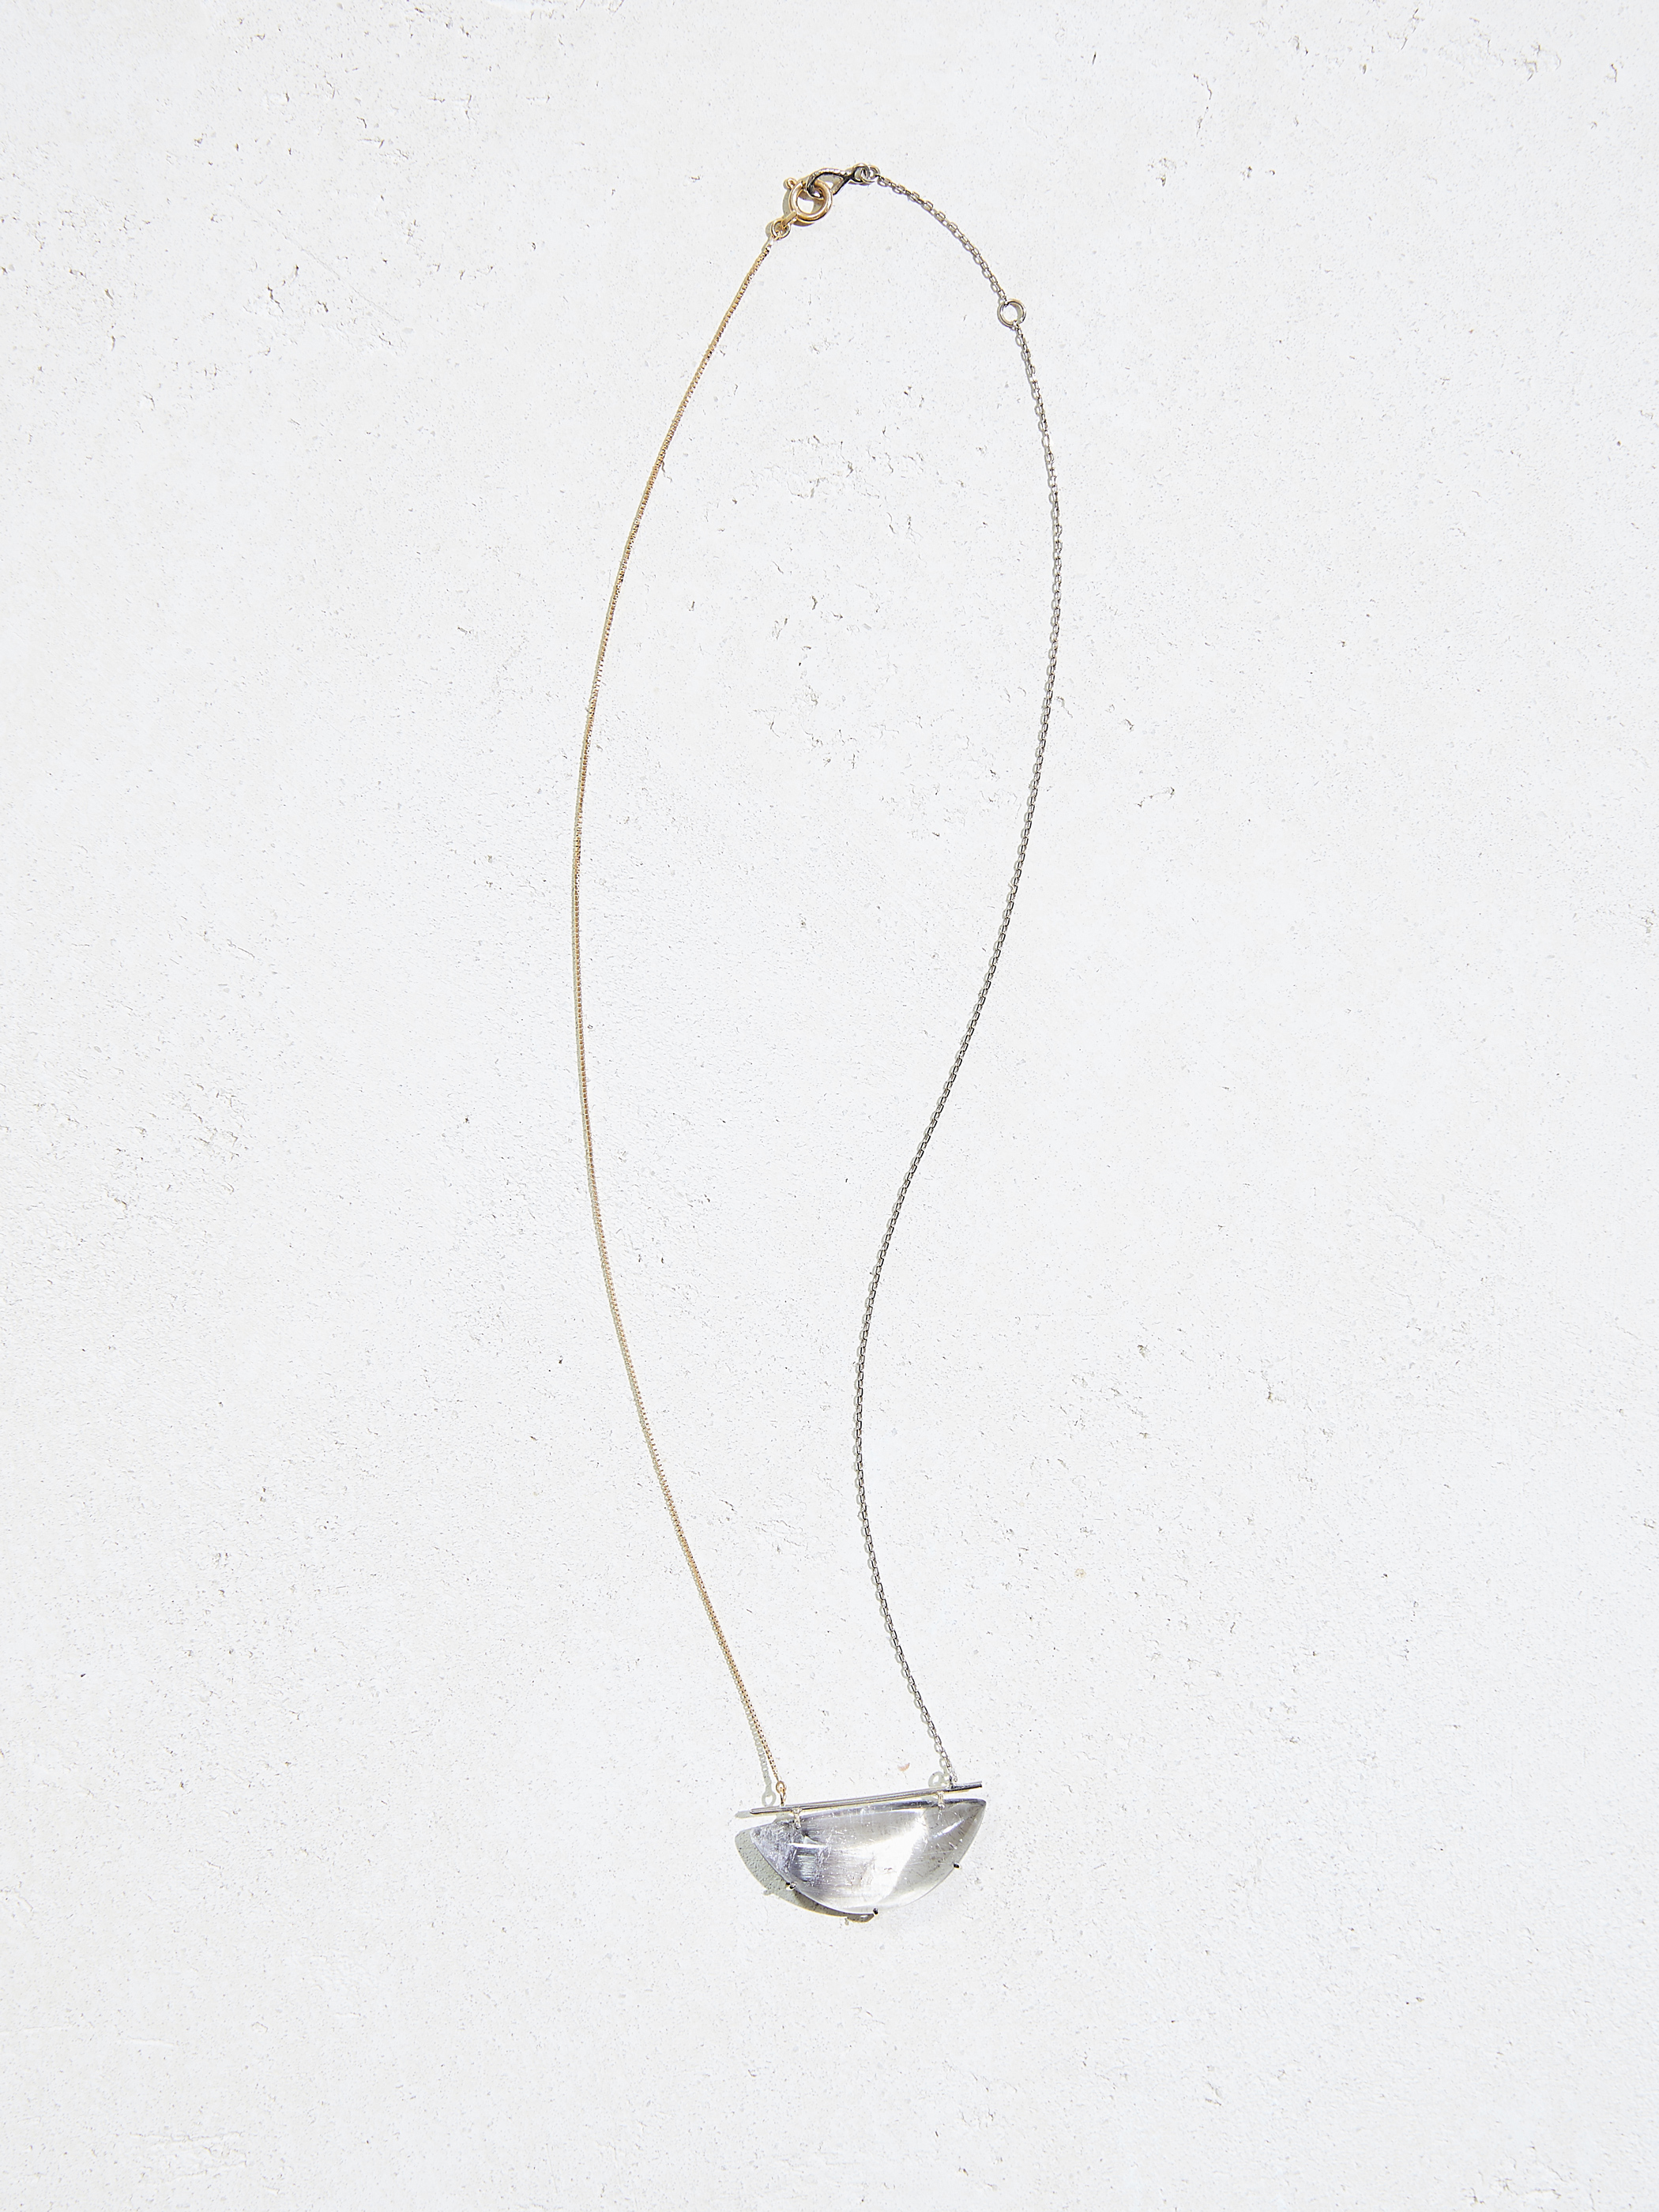 【SOLD OUT】BROOKITE IN QUARTZ NECKLACE